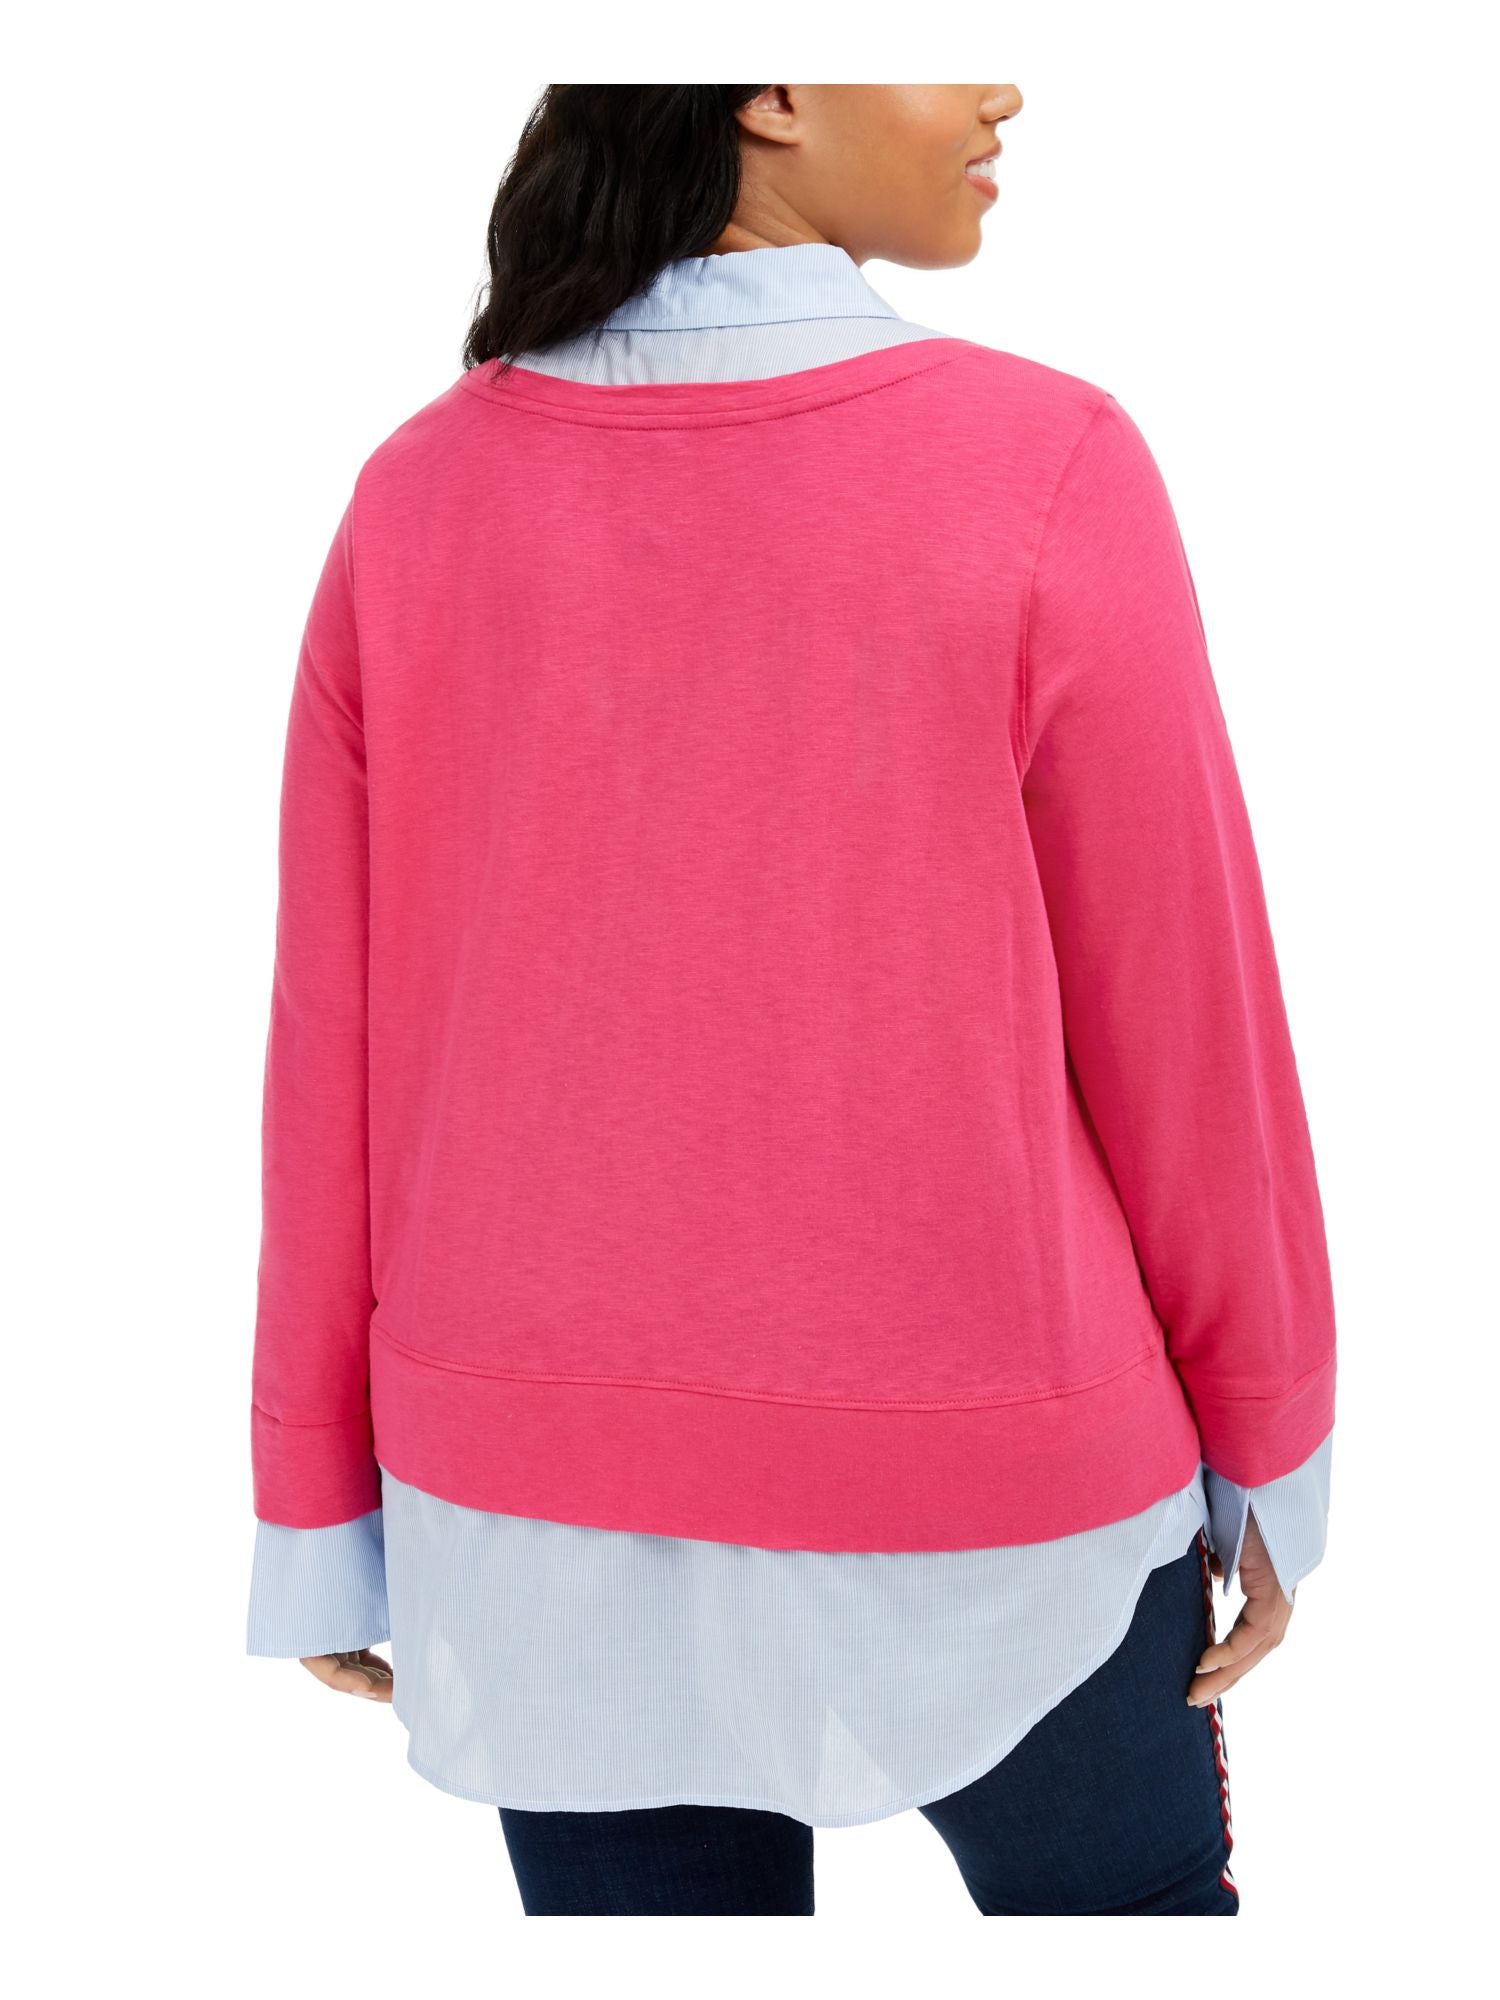 Tommy Hilfiger Women's Long Sleeve Collared Blouse Pink Size 0X